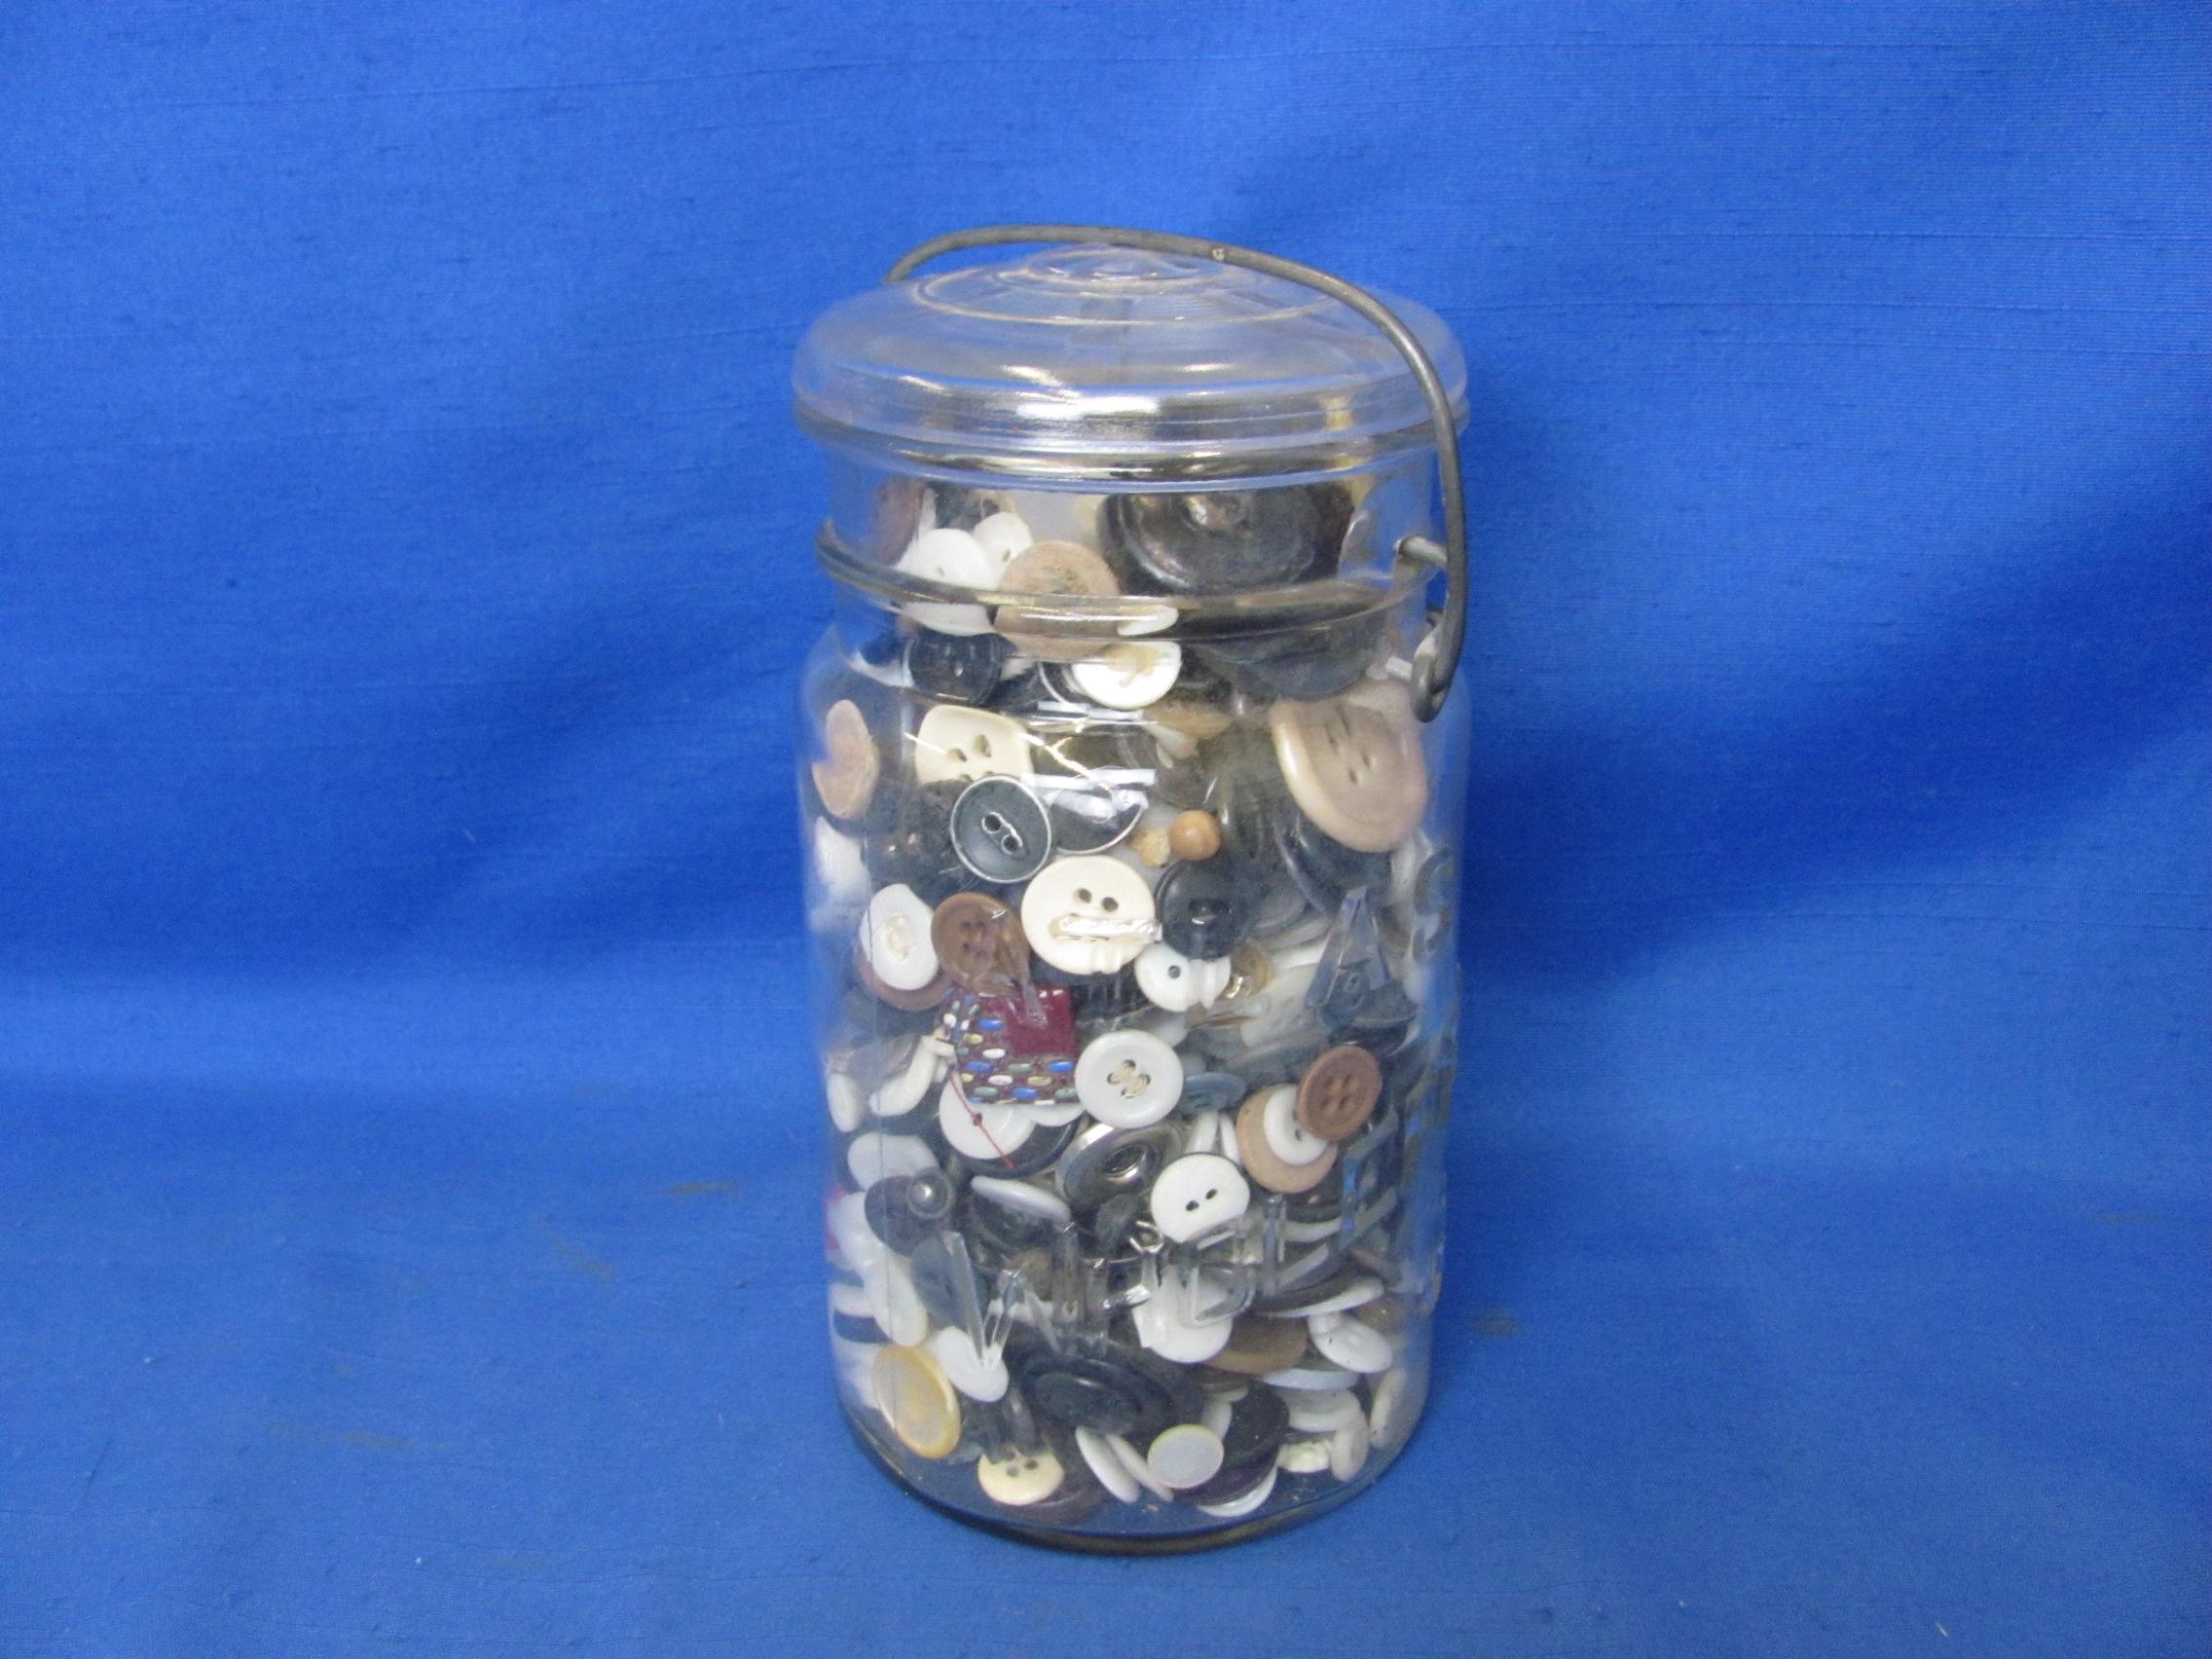 Buttons In Atlas Wholefruit Jar – Embossed Print & 7” T – As Shown